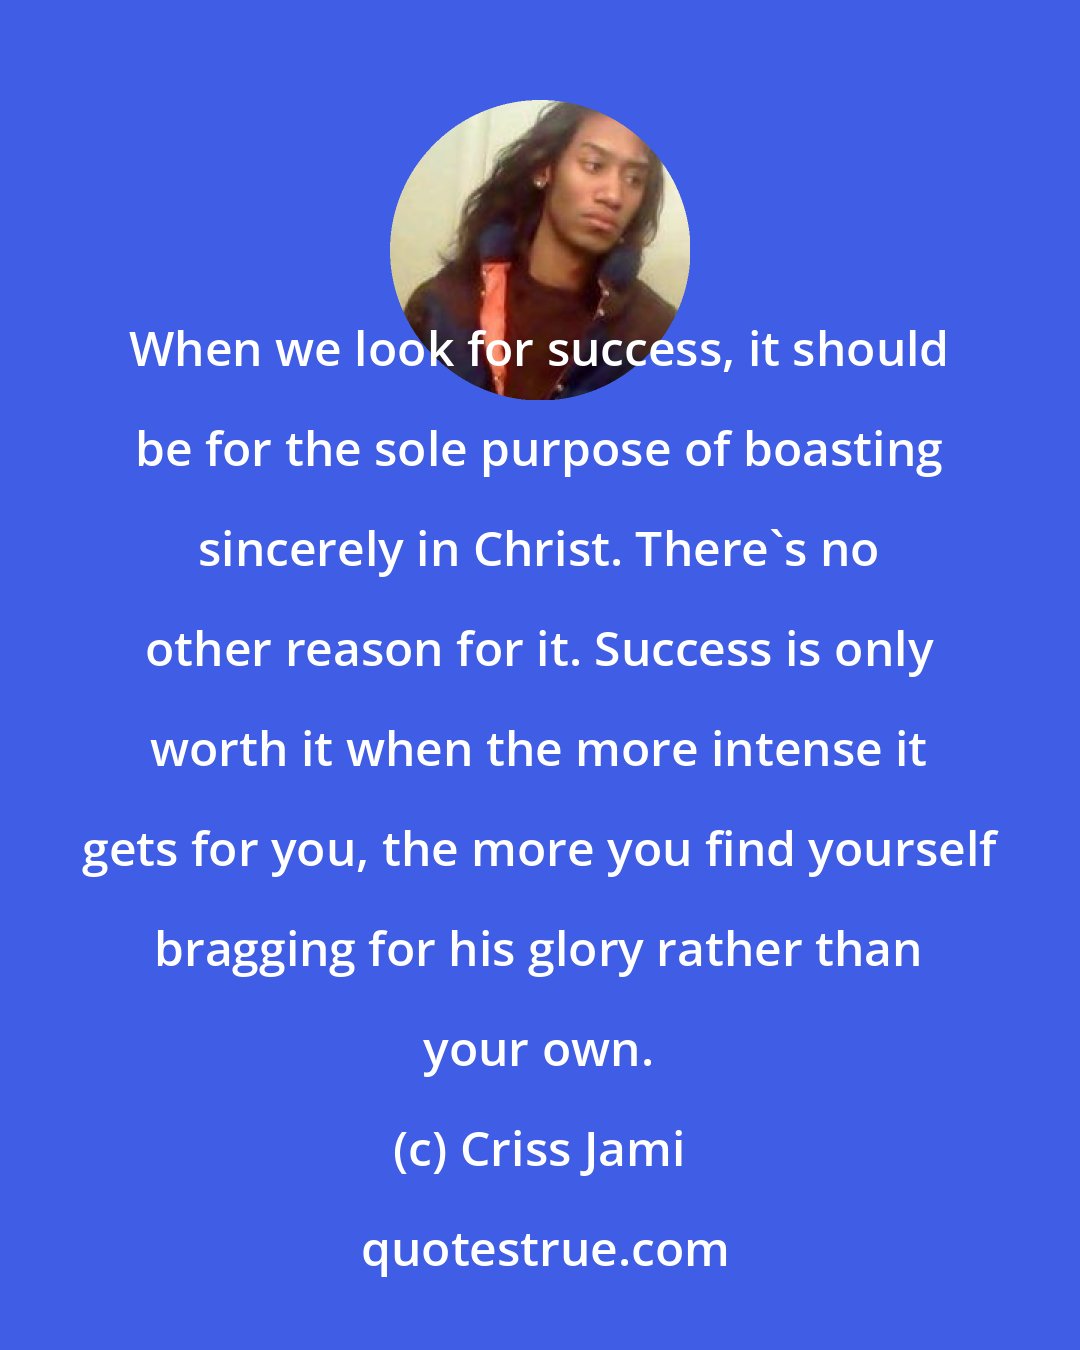 Criss Jami: When we look for success, it should be for the sole purpose of boasting sincerely in Christ. There's no other reason for it. Success is only worth it when the more intense it gets for you, the more you find yourself bragging for his glory rather than your own.